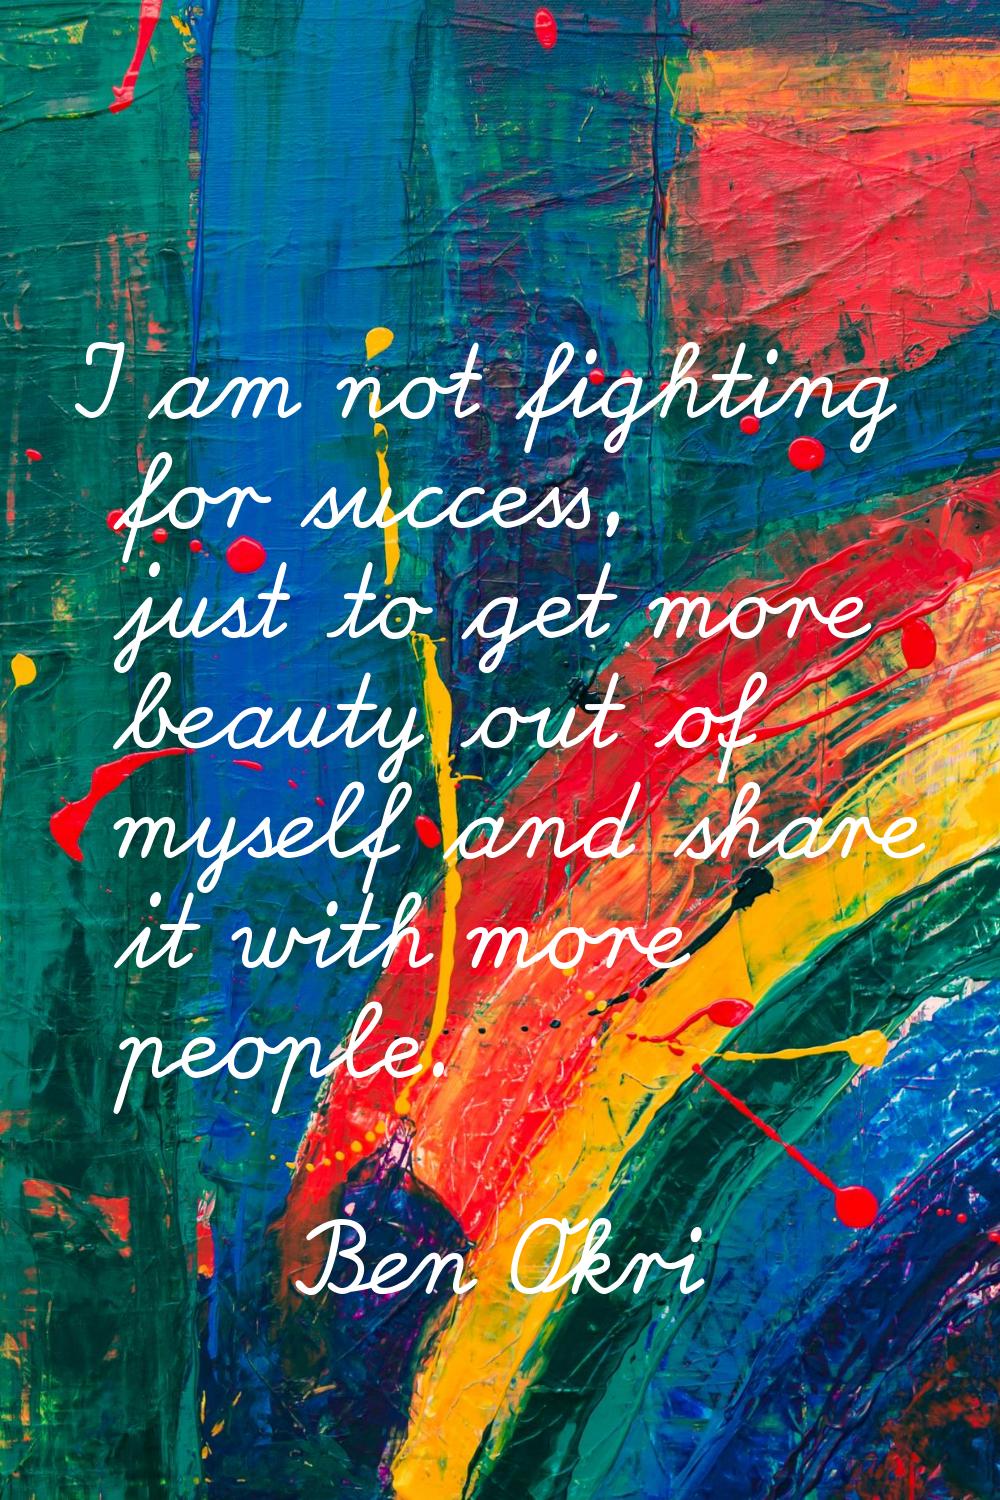 I am not fighting for success, just to get more beauty out of myself and share it with more people.